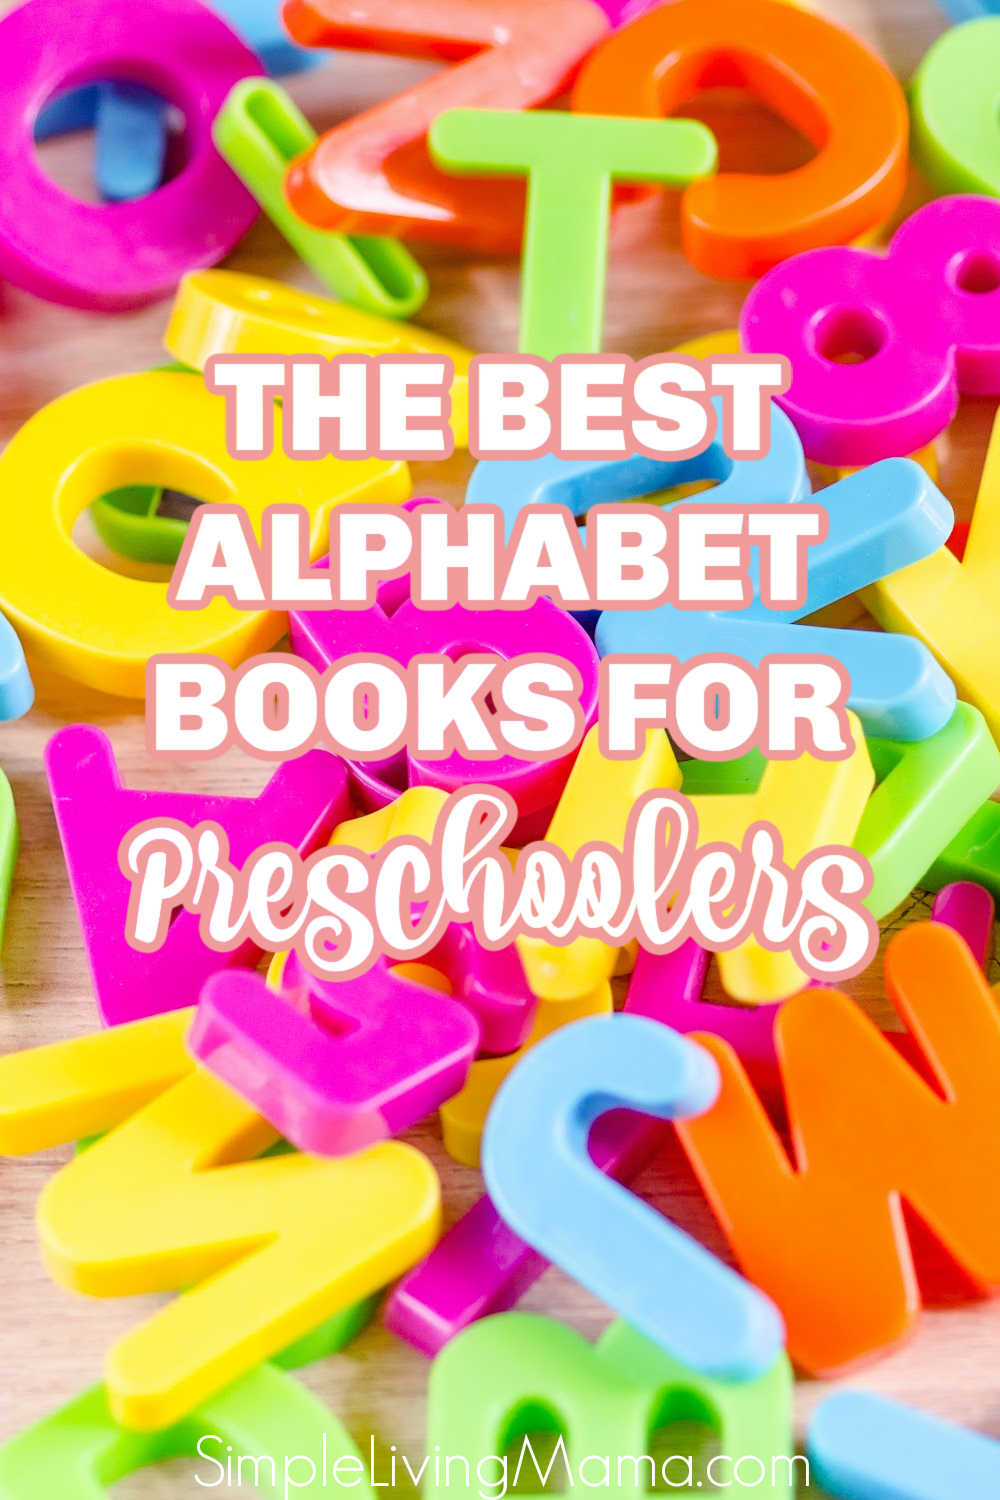 The Pirates of The Alphabet: Pirate ABCs and Activity book